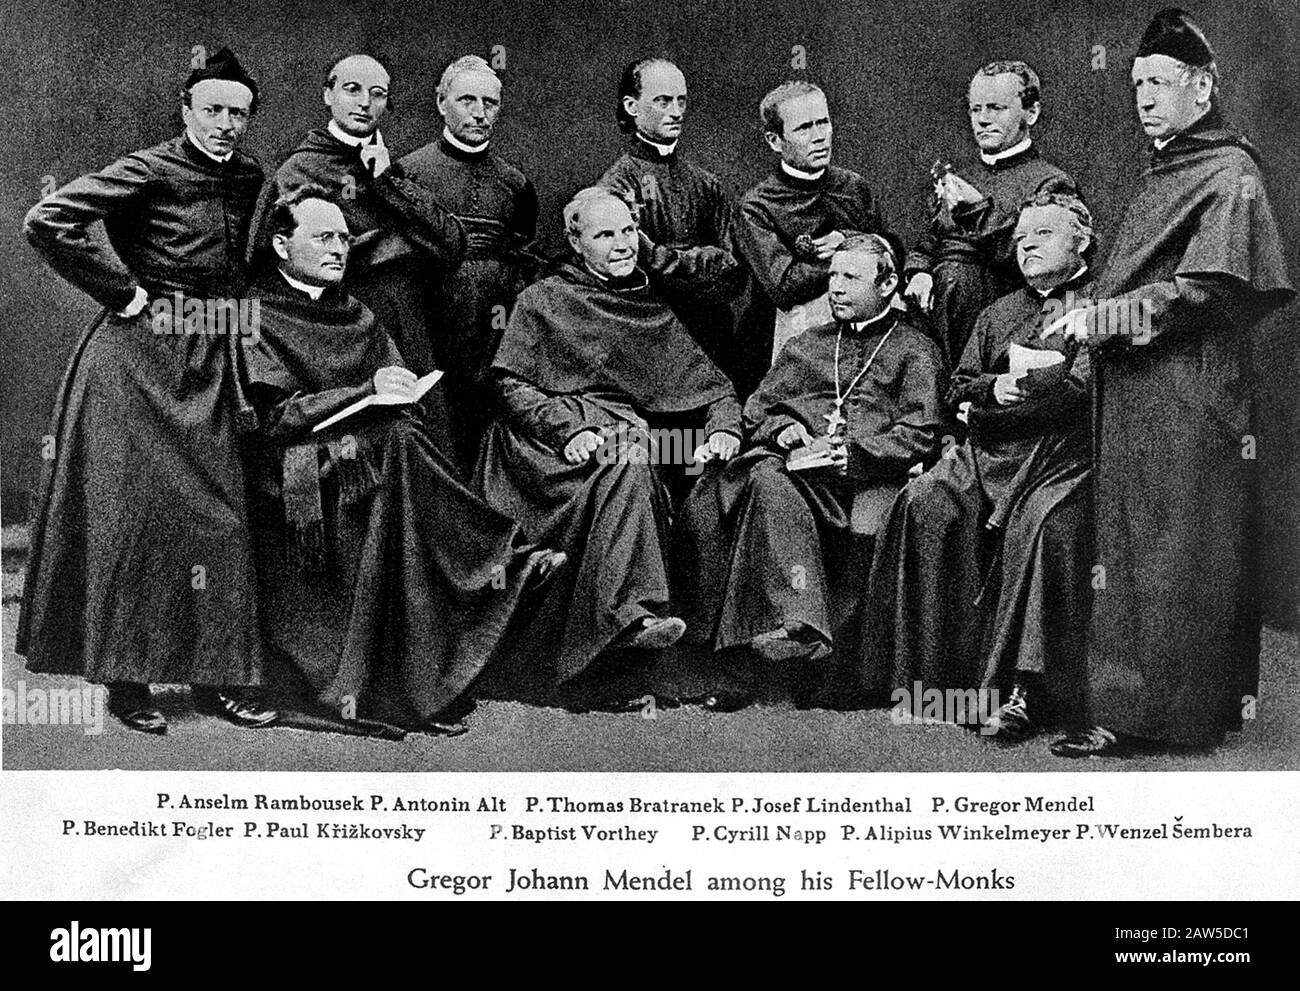 1880 ca , AUSTRIA : The Slesian zoologist , biologist and physician Catholic Agostinian friar GREGOR JOHANN MENDEL ( 1822 - 1884 ) . Mendel with other Stock Photo